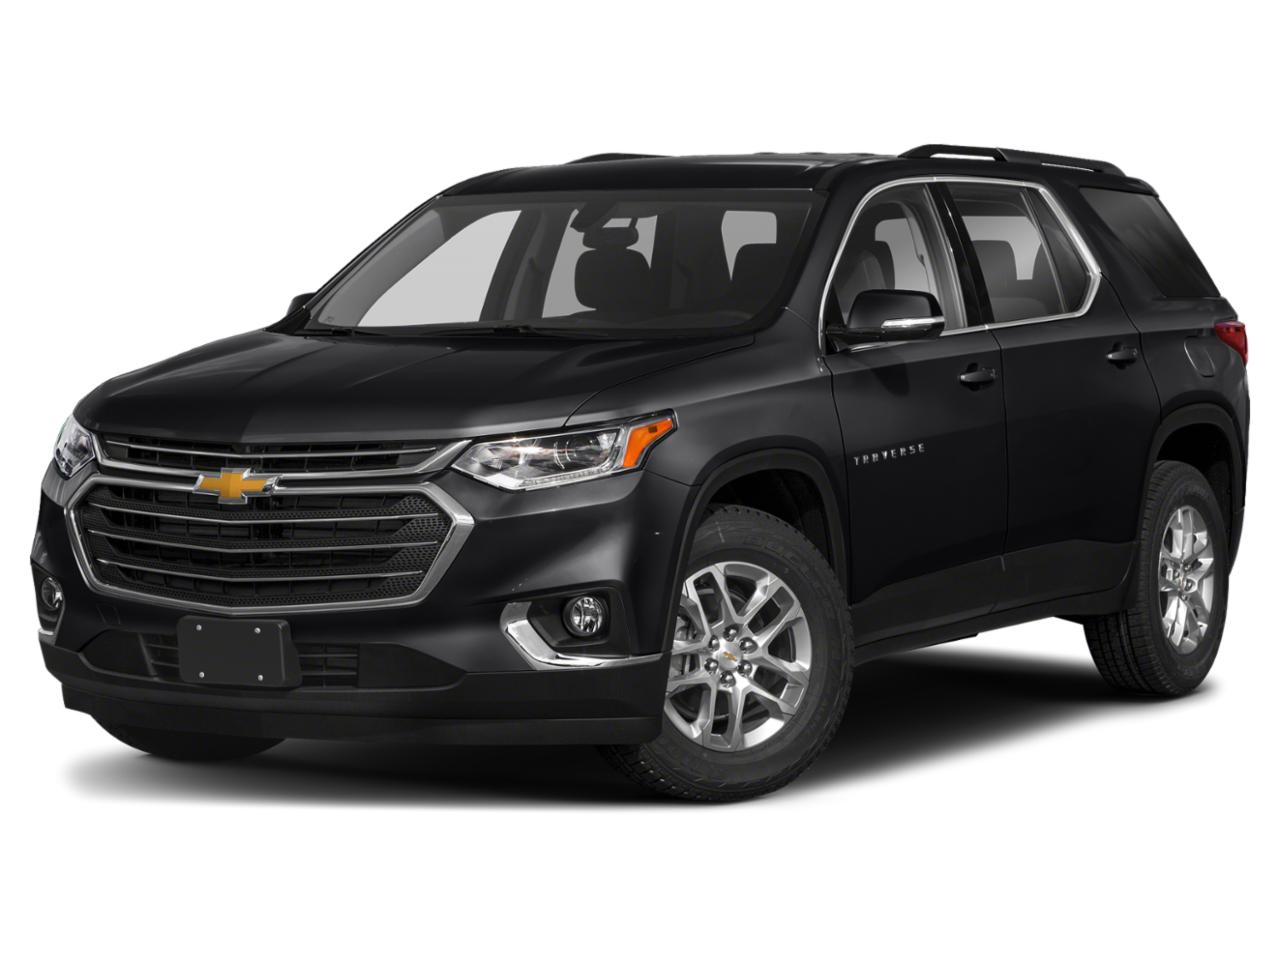 2020 Chevrolet Traverse Vehicle Photo in Saint Charles, IL 60174